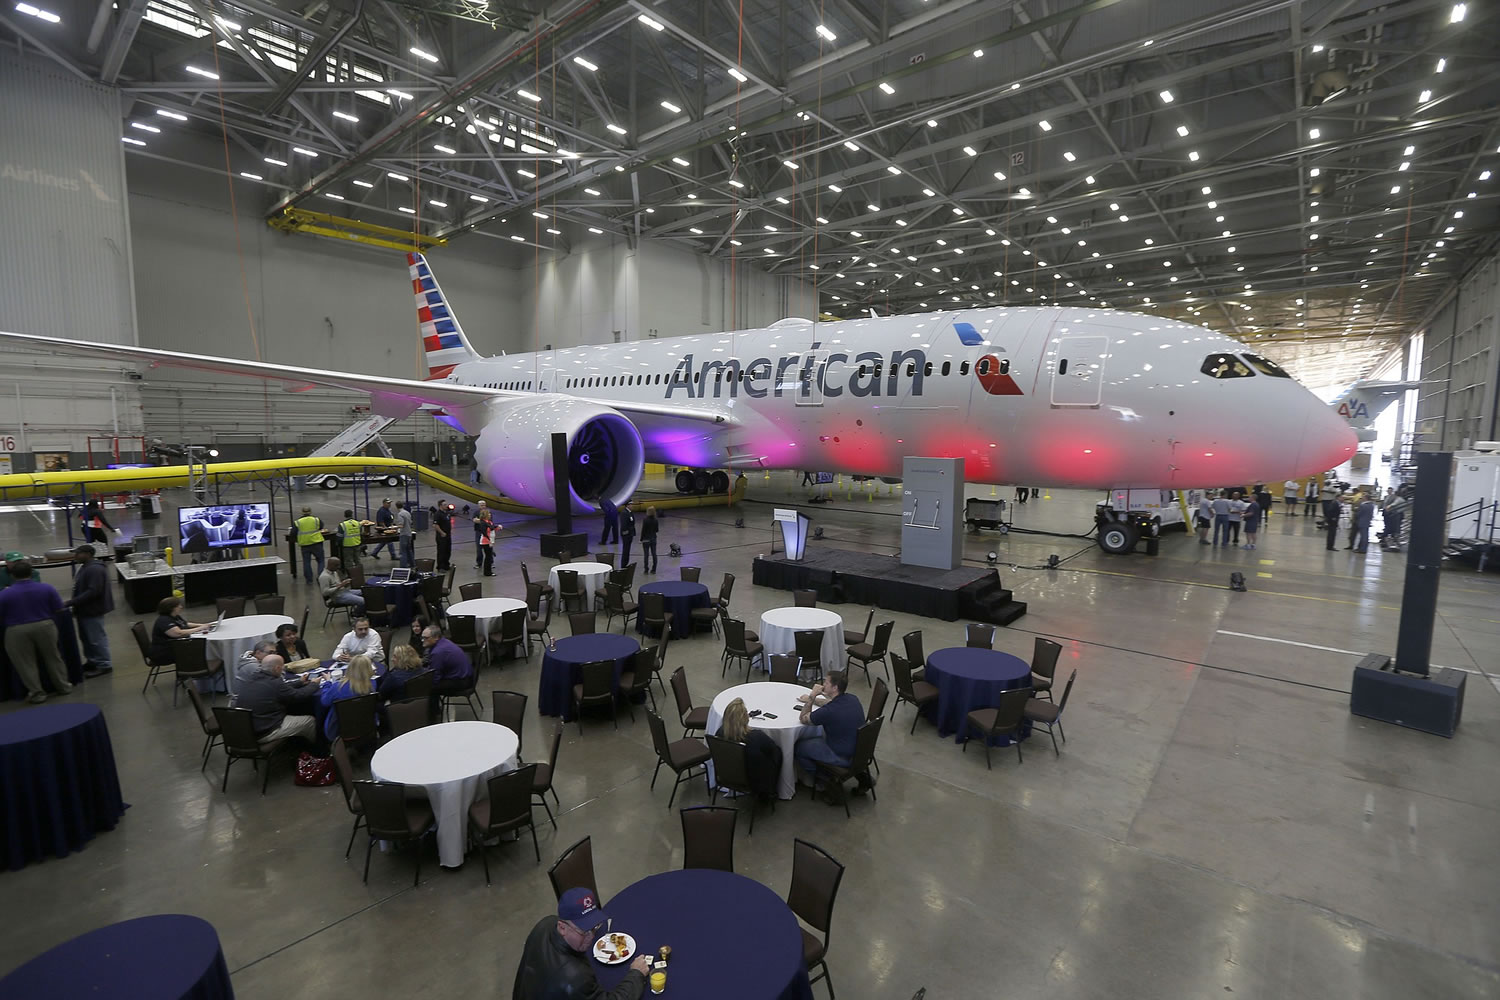 A new American Airlines Boeing 787 sits in a hangar at Dallas-Fort Worth International Airport on April 29 in Dallas.